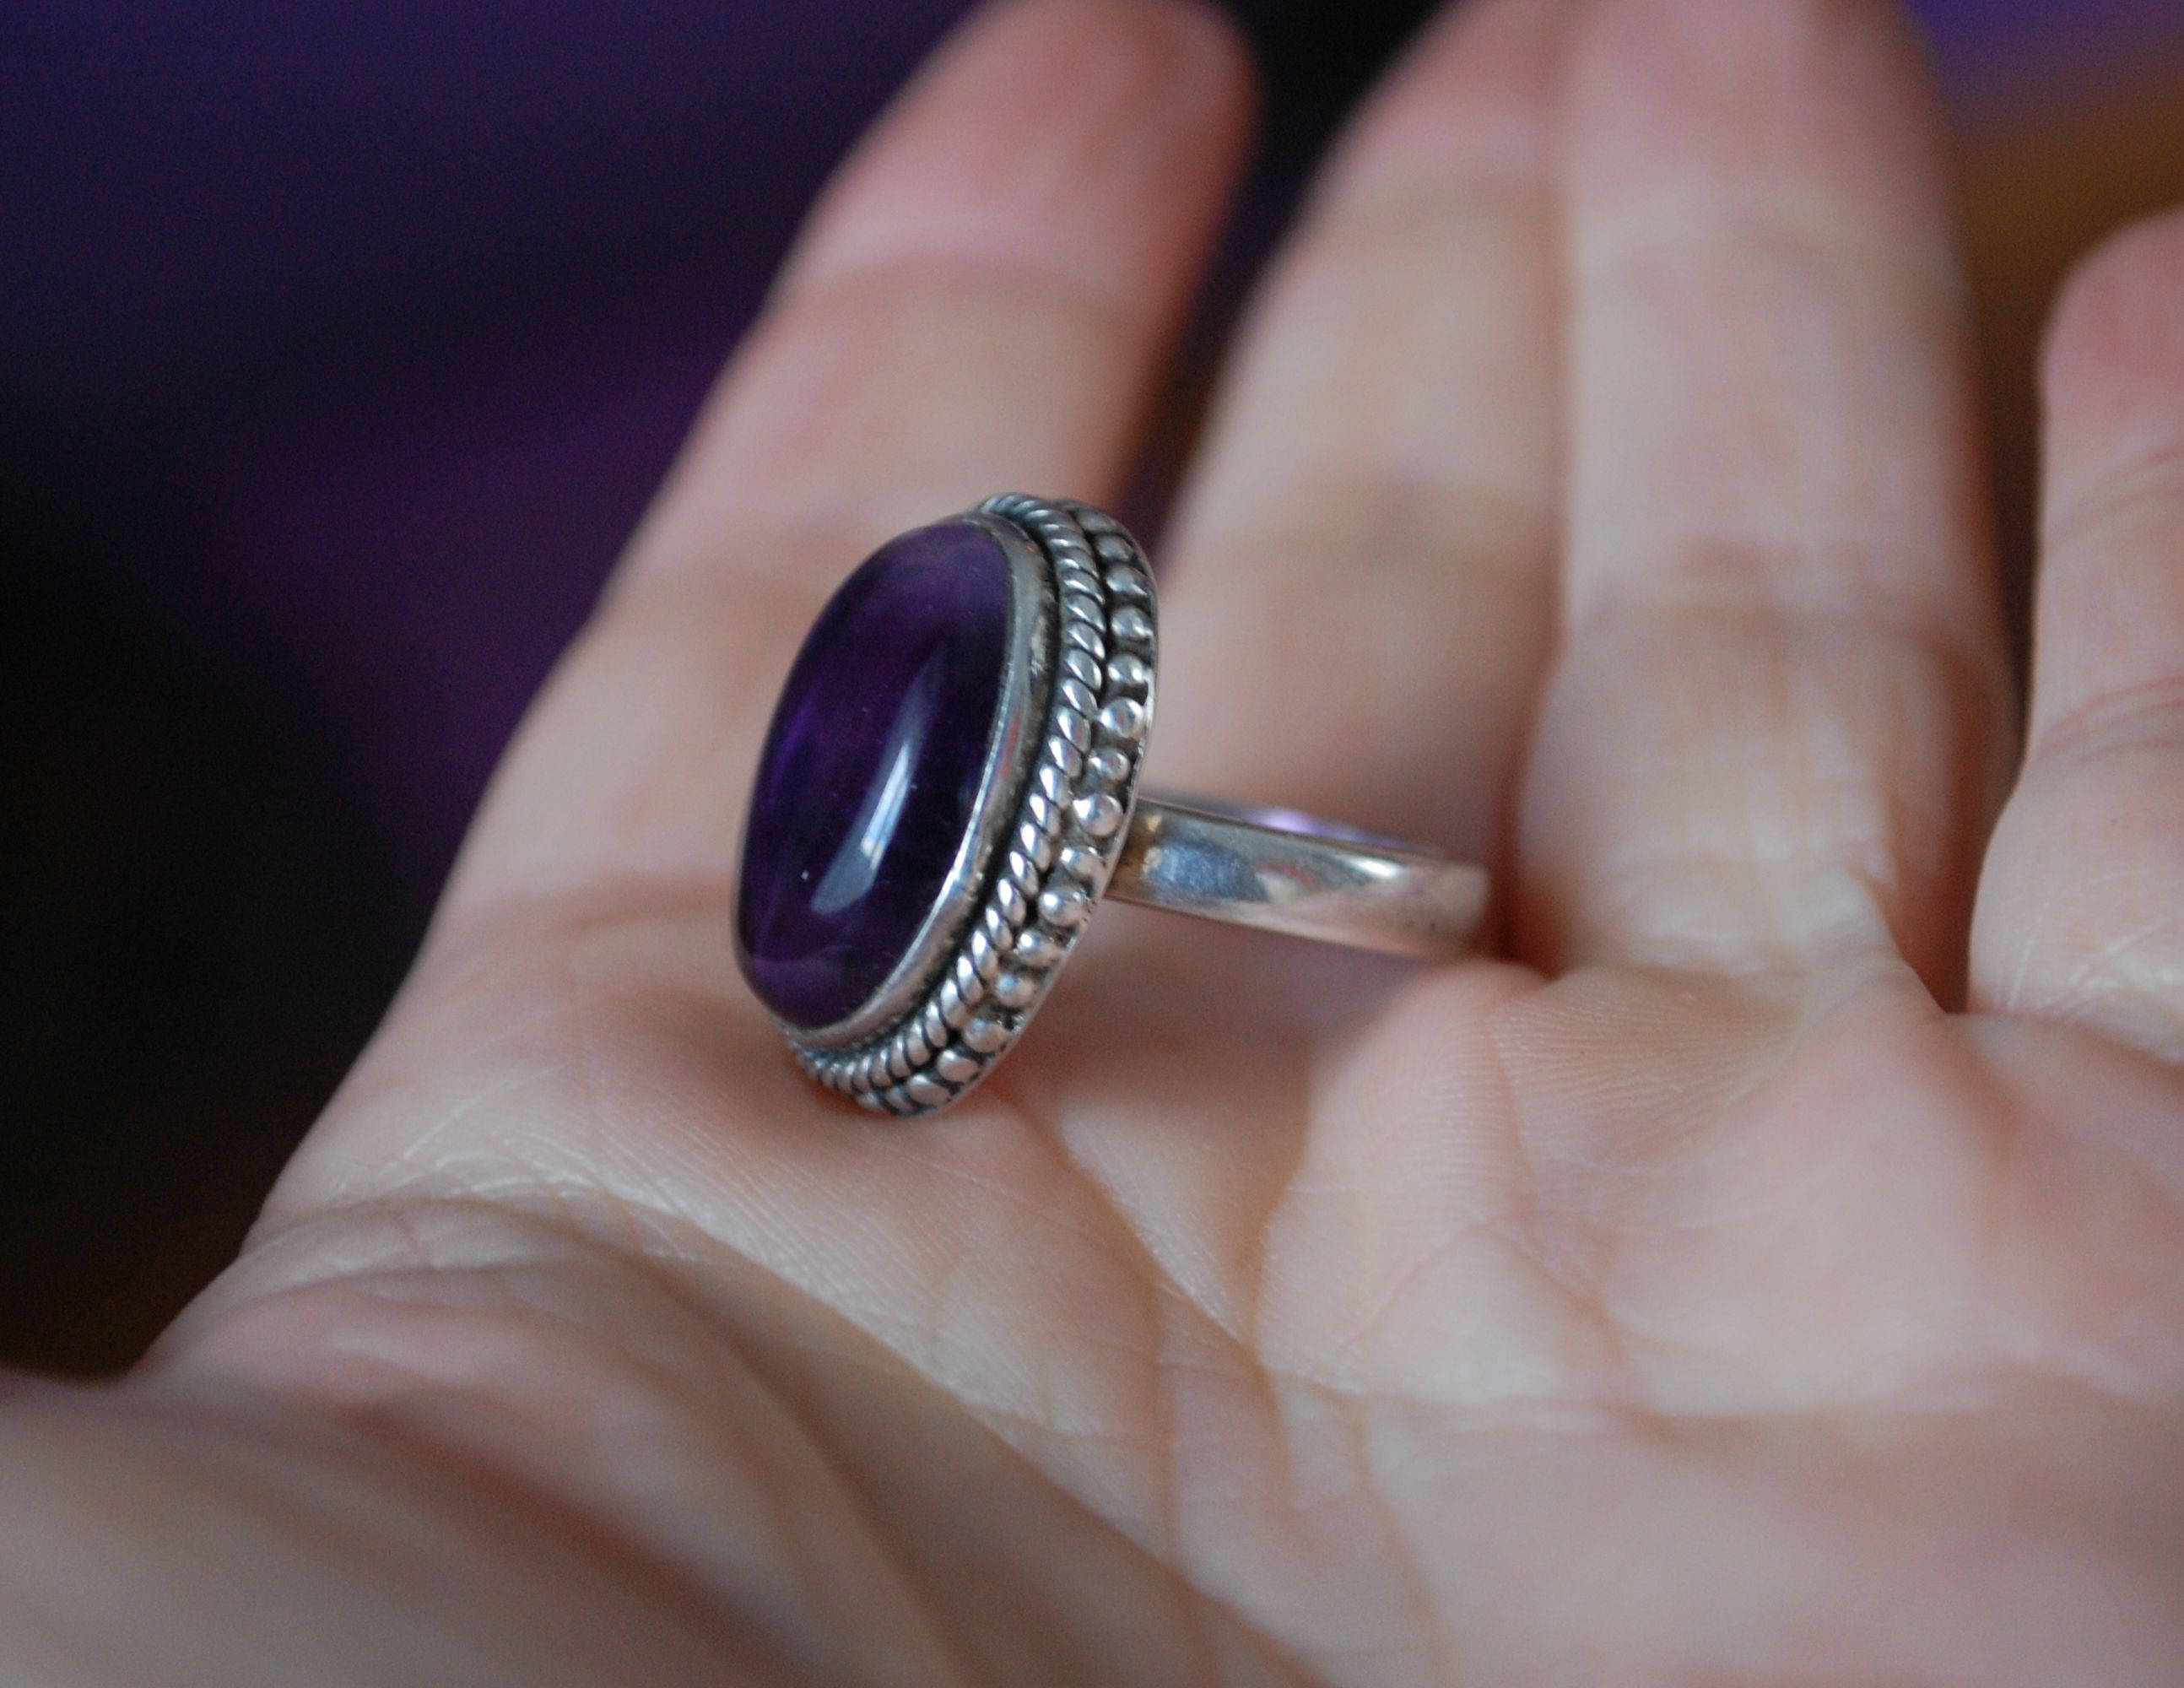 Amethyst Ring from India - Size 4.5 - Indian Amethyst Ring - Ethnic Amethyst Ring - Indian Jewelry - Ethnic Ring - Amethyst Ring